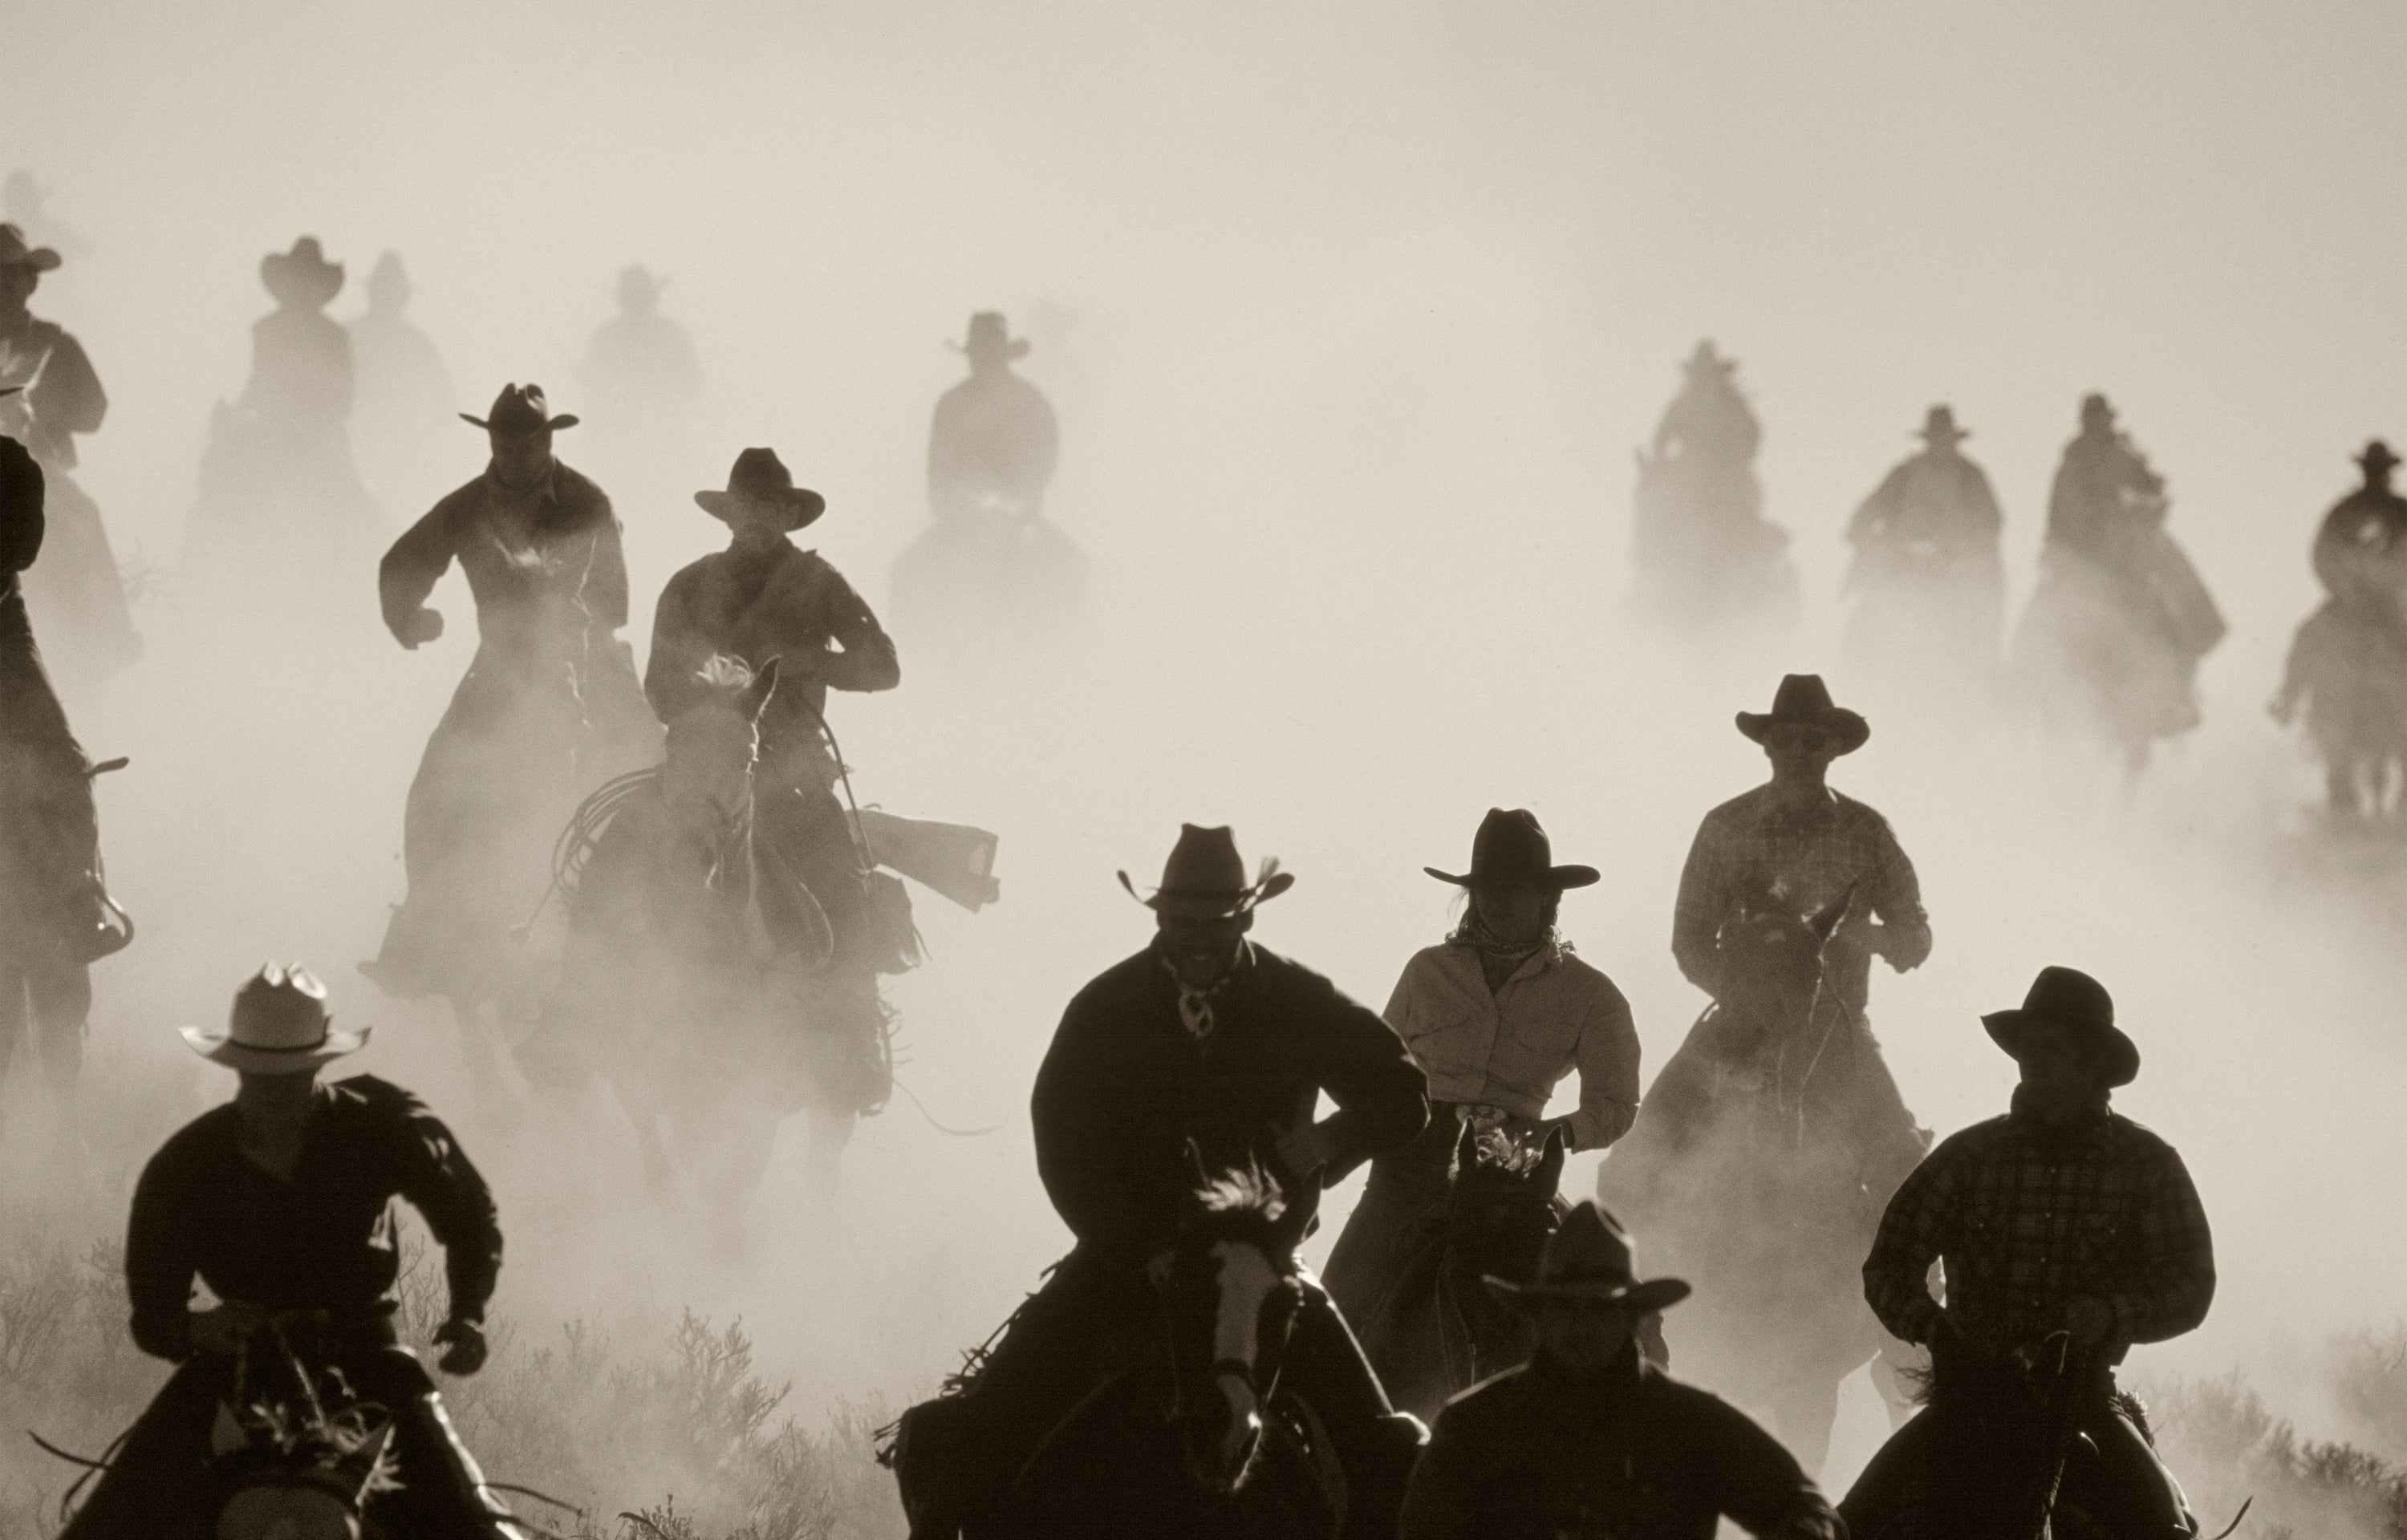 Posse, a group of horseback riders in the dust by Jules Frazier fine art photographer